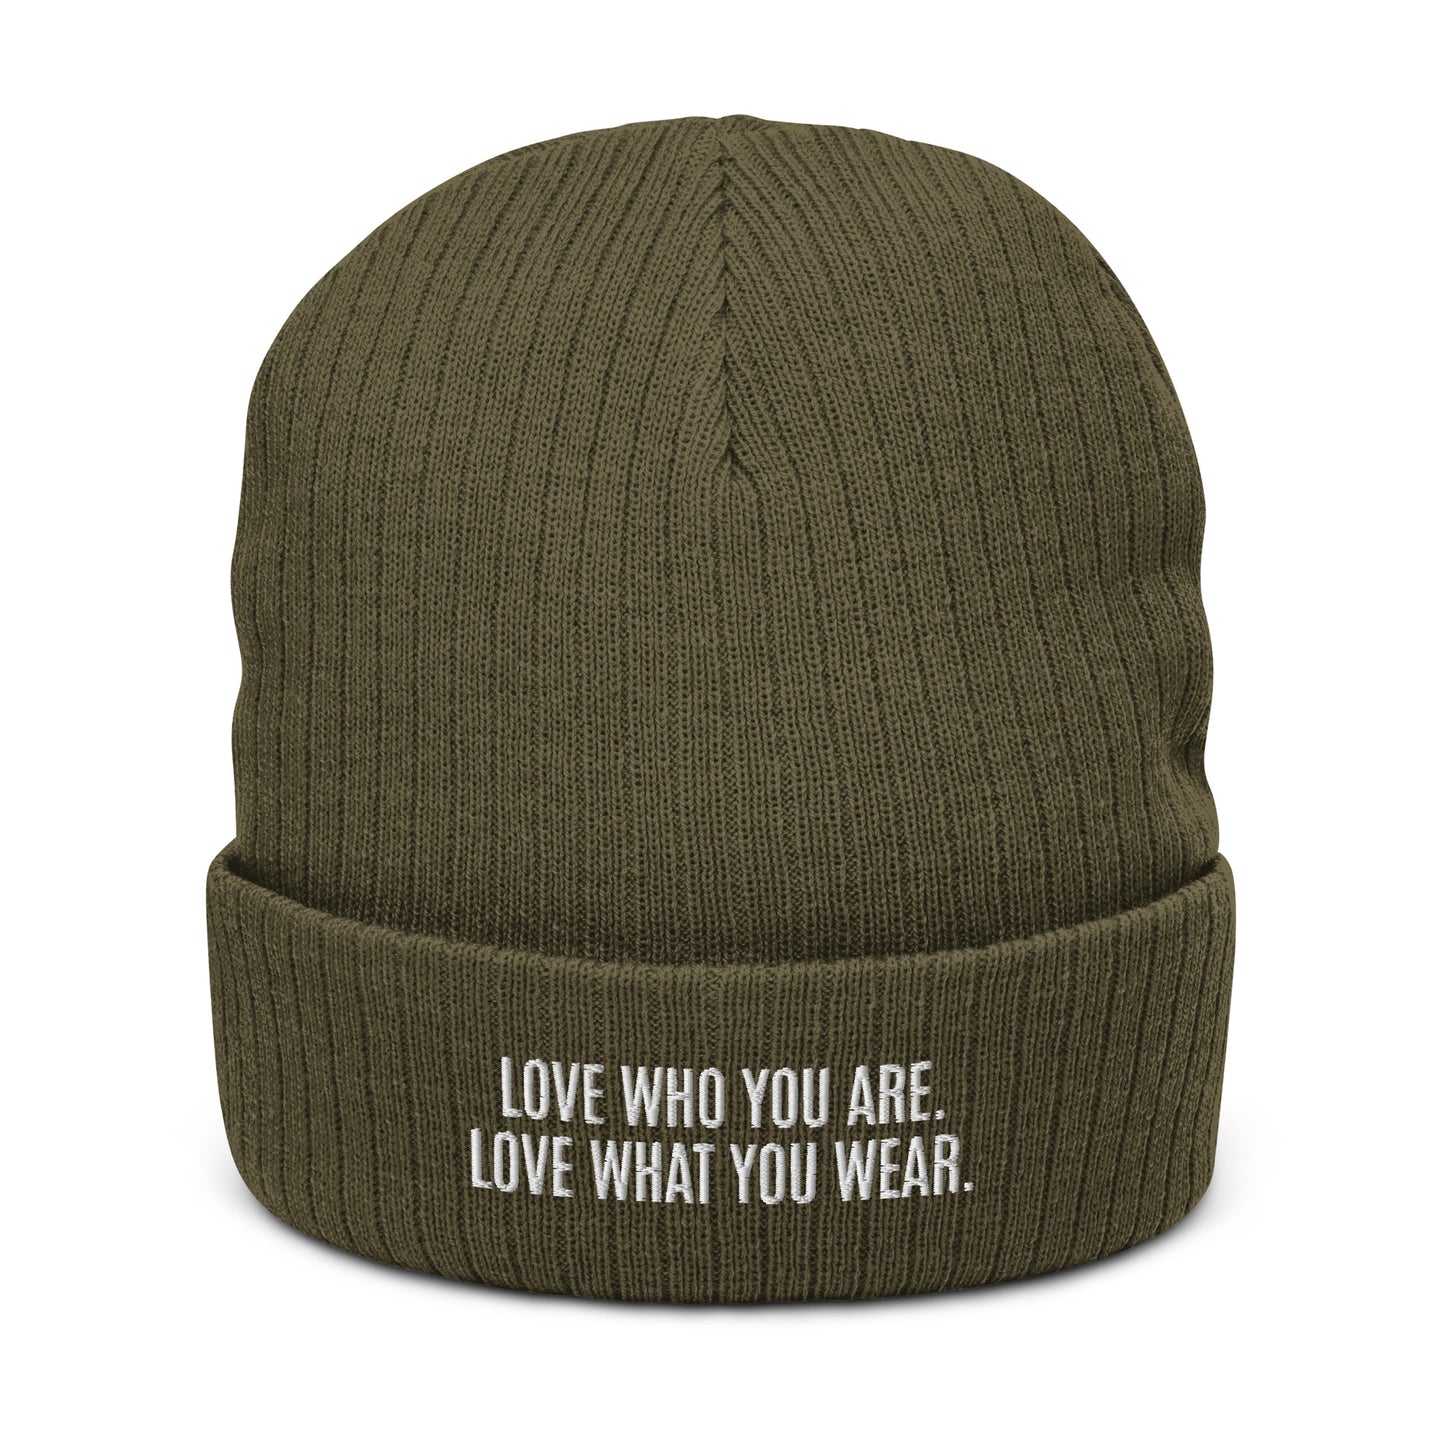 "Love Who You Are" Ribbed Knit Beanie (Embrace Body Love)